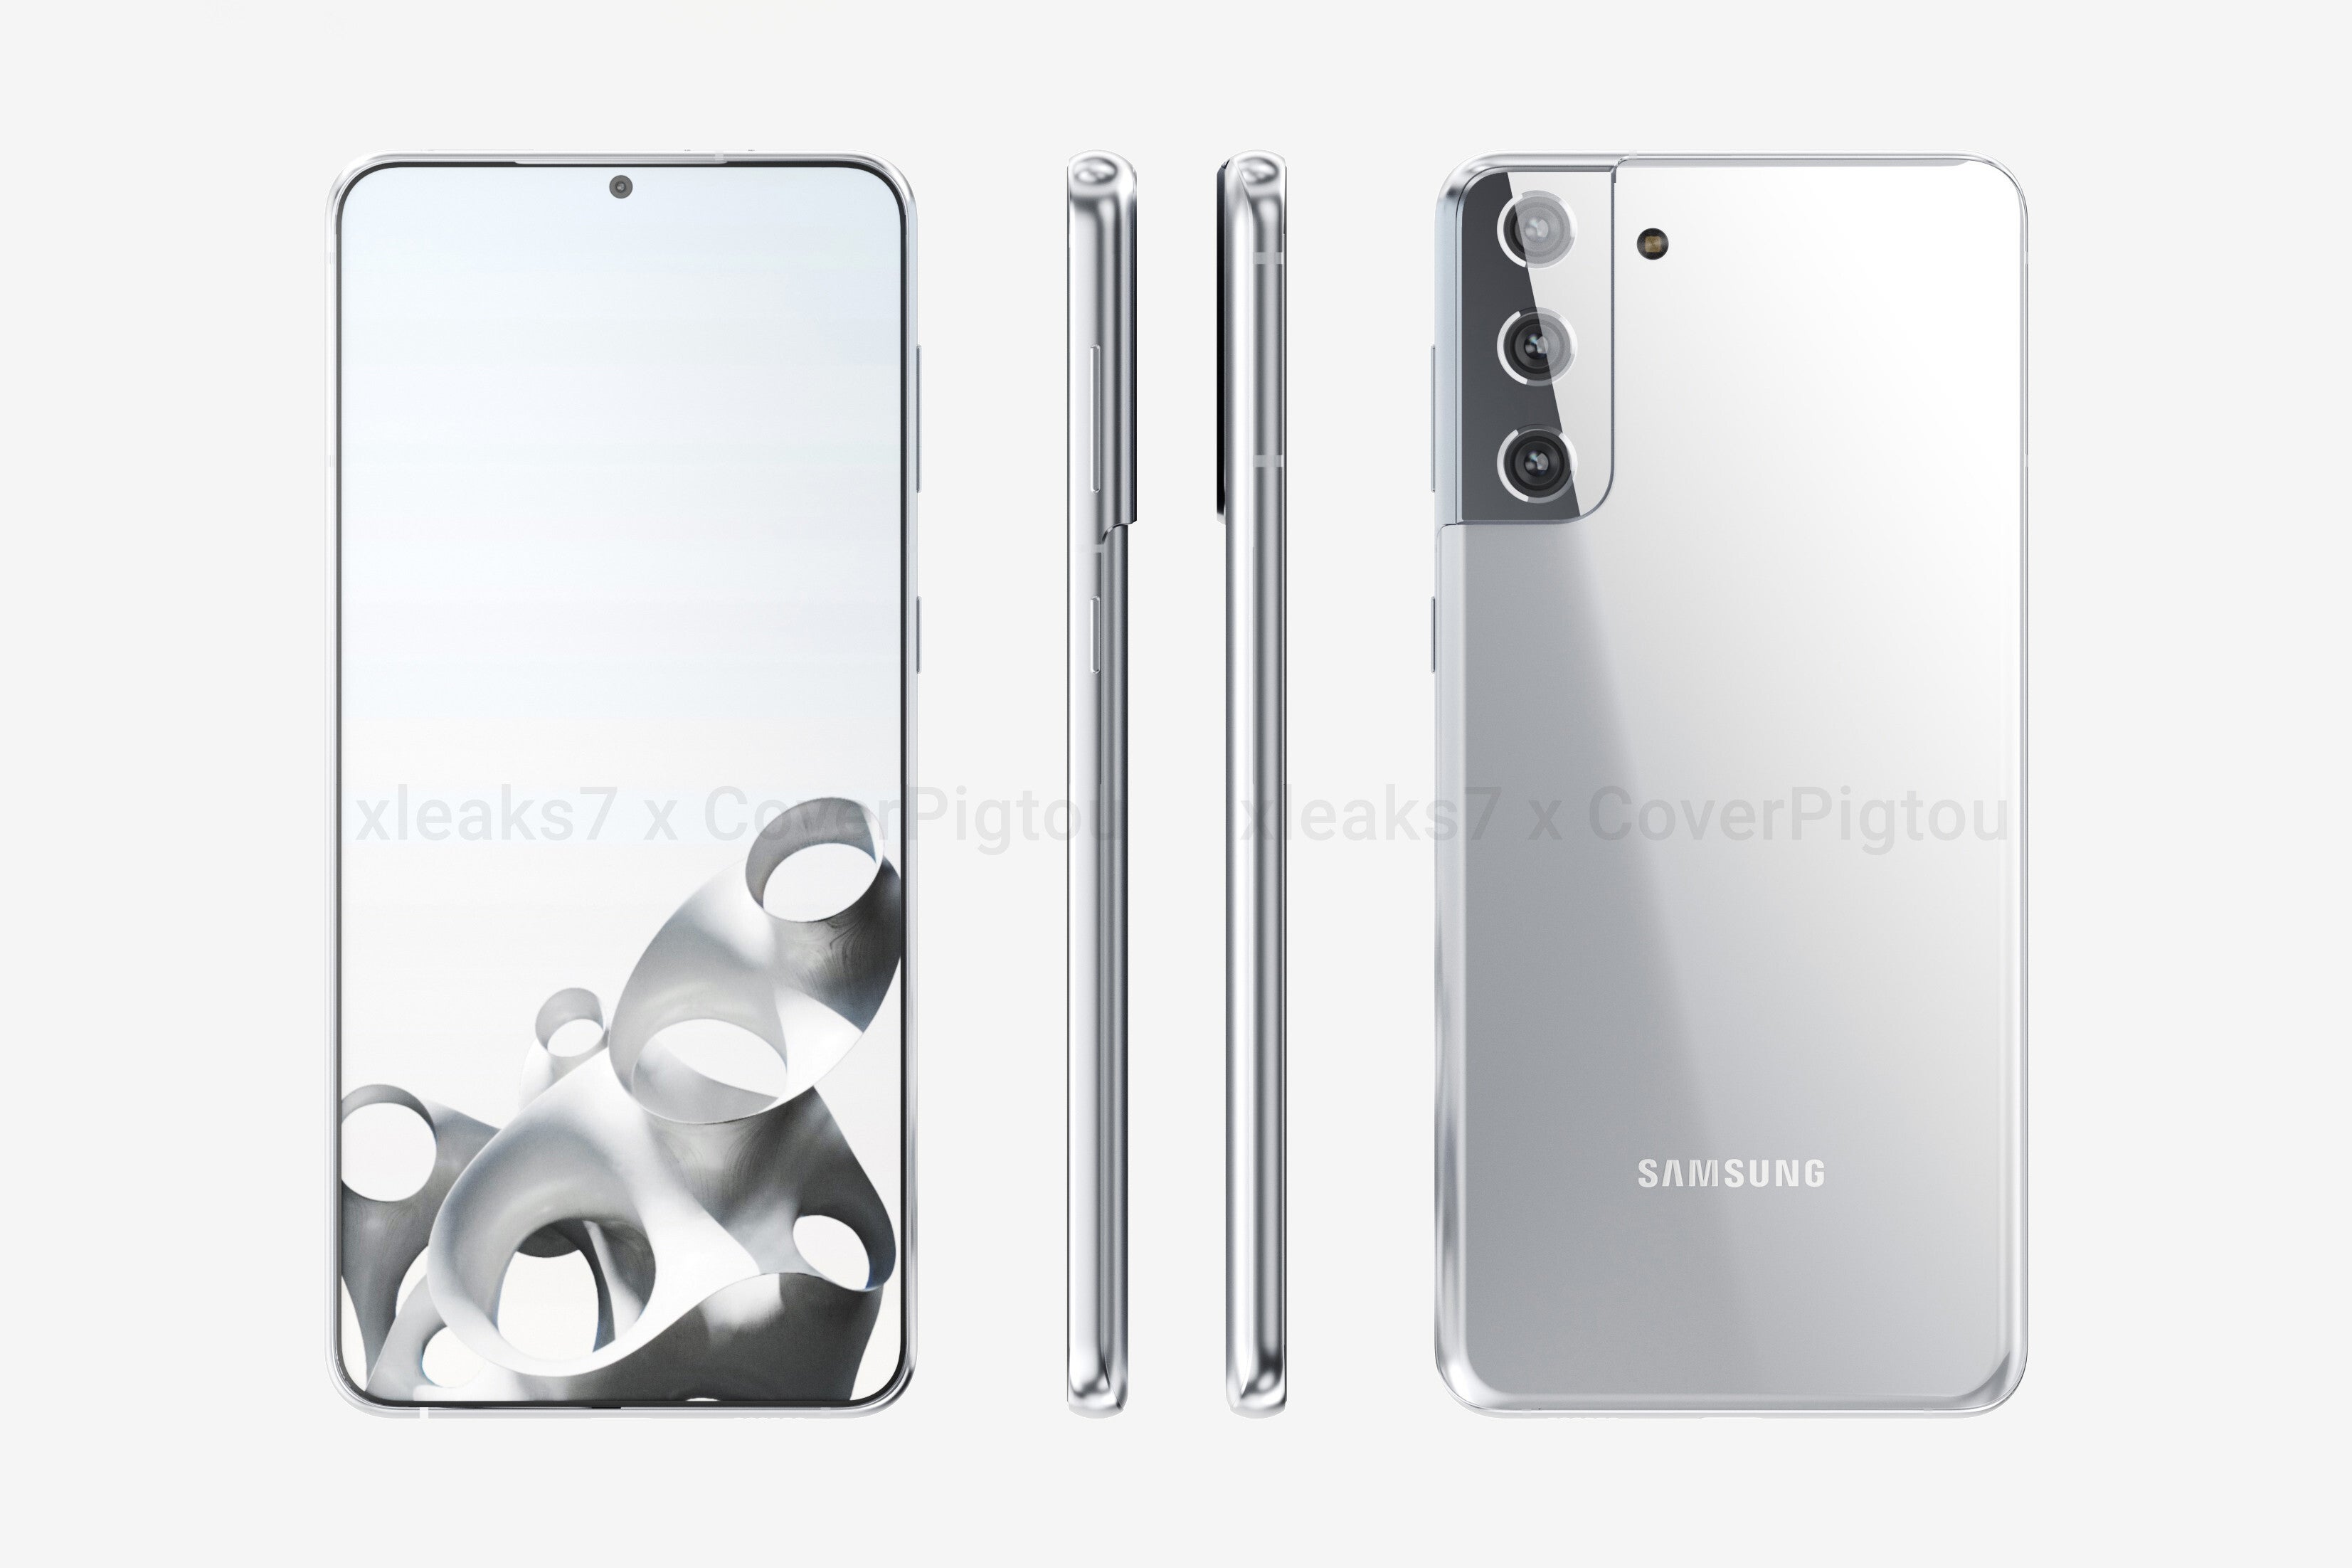 Samsung Galaxy S21+ CAD-based render - Samsung said to be planning big price cuts for 5G Galaxy S21 series